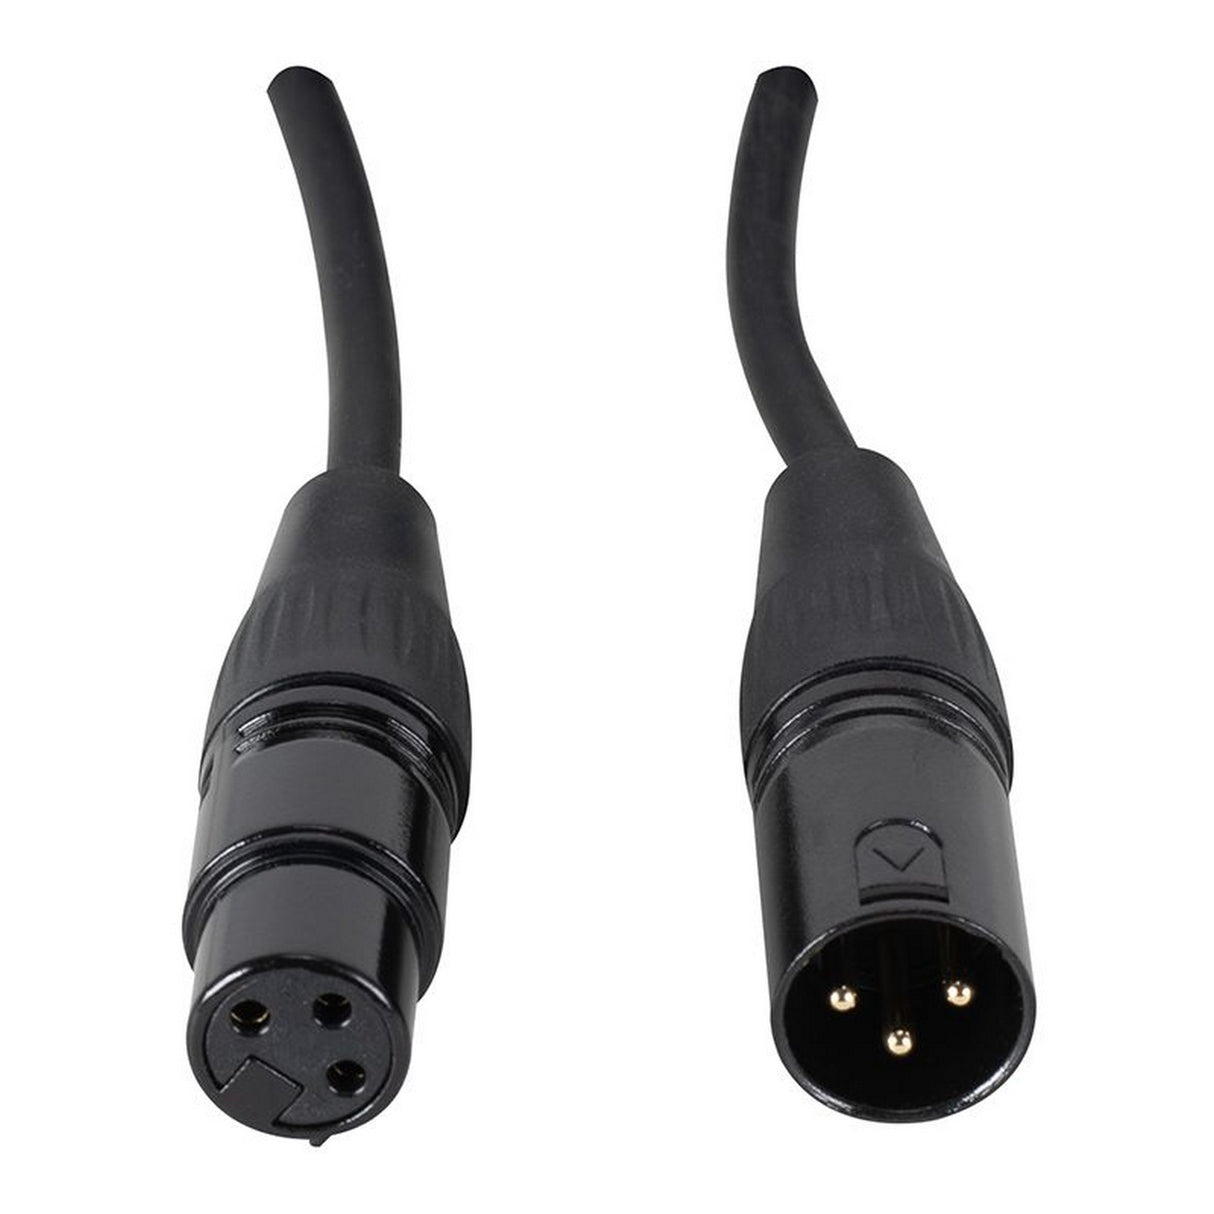 Accu Cable XL25A 25-Foot 3-Pin XLR Male to XLR Female Cable